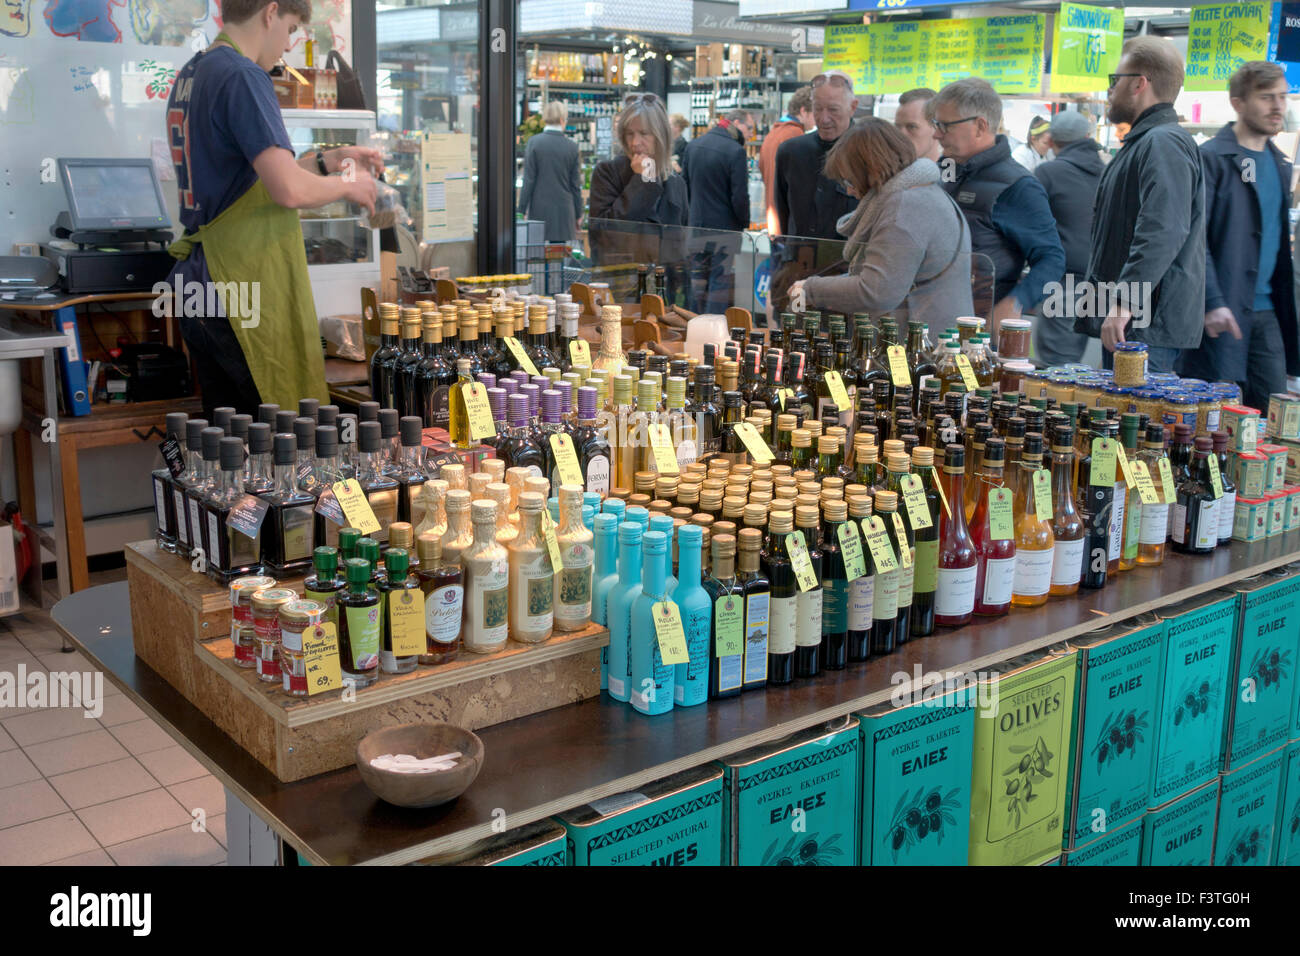 Gourmet products, extra virgin olive oil, balsamico, truffle oil, etc. at Torvehallerne, the covered food market, Israels Plads, Israels Square. Stock Photo